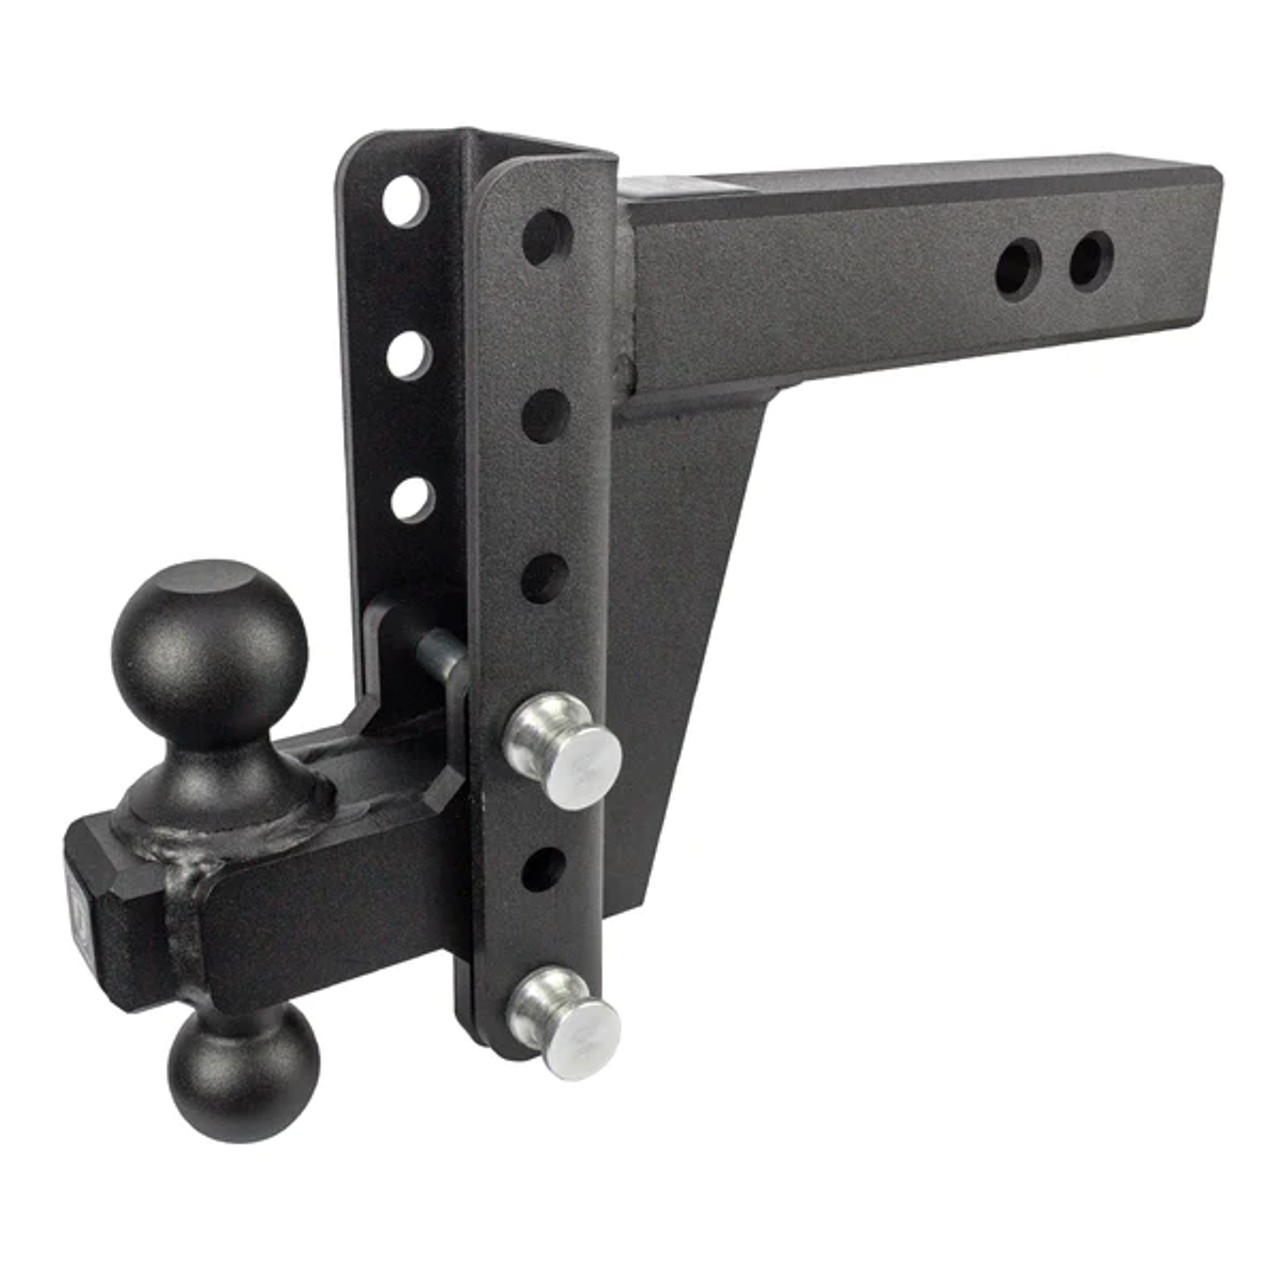 BPED256 --- Dual-Ball Four Position 2-1/2" Shank Extreme Duty Hitch - 36k